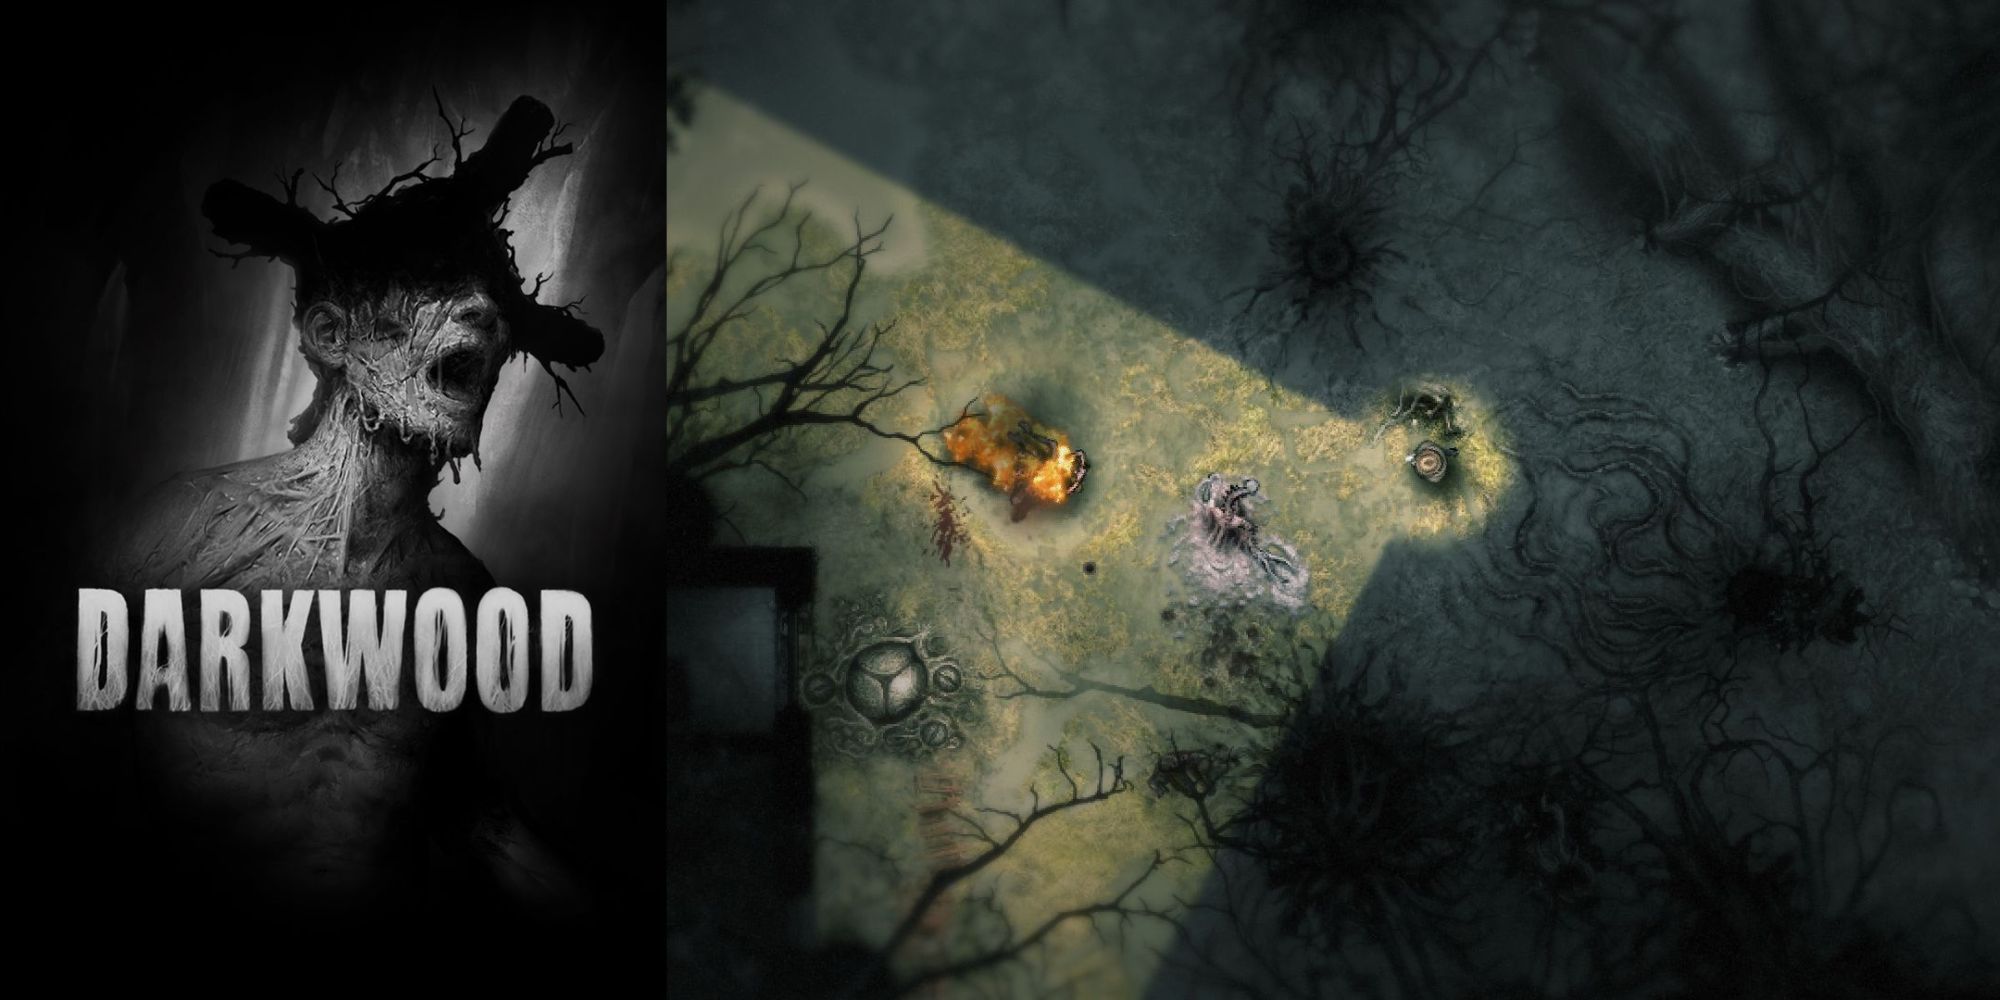 Darkwood Cover art with in-game image